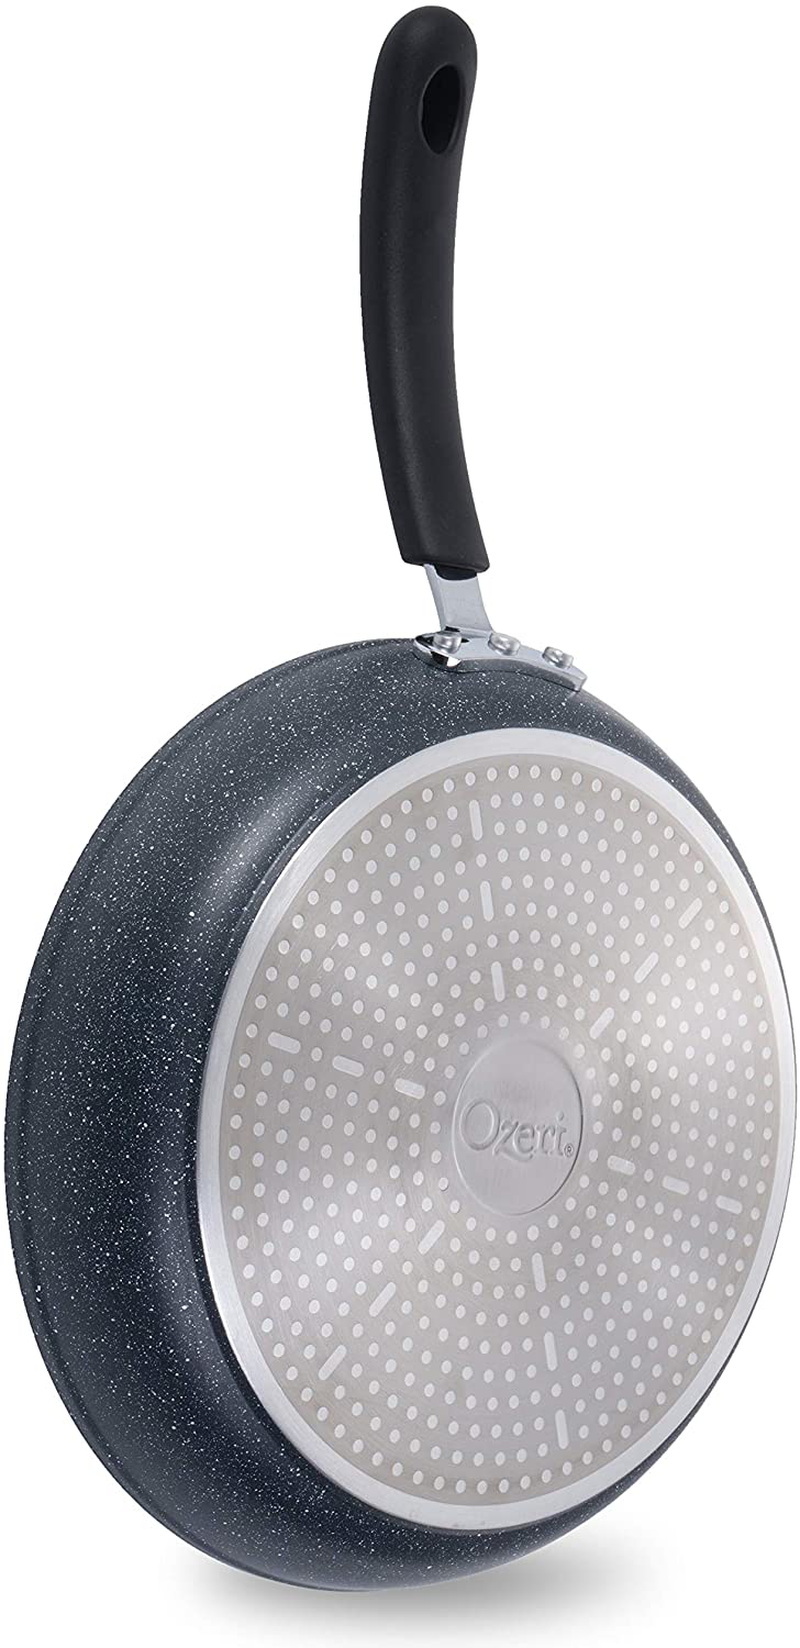 12" Stone Earth Frying Pan by Ozeri, with 100% APEO & PFOA-Free Stone-Derived Non-Stick Coating from Germany, Obsidian Gold